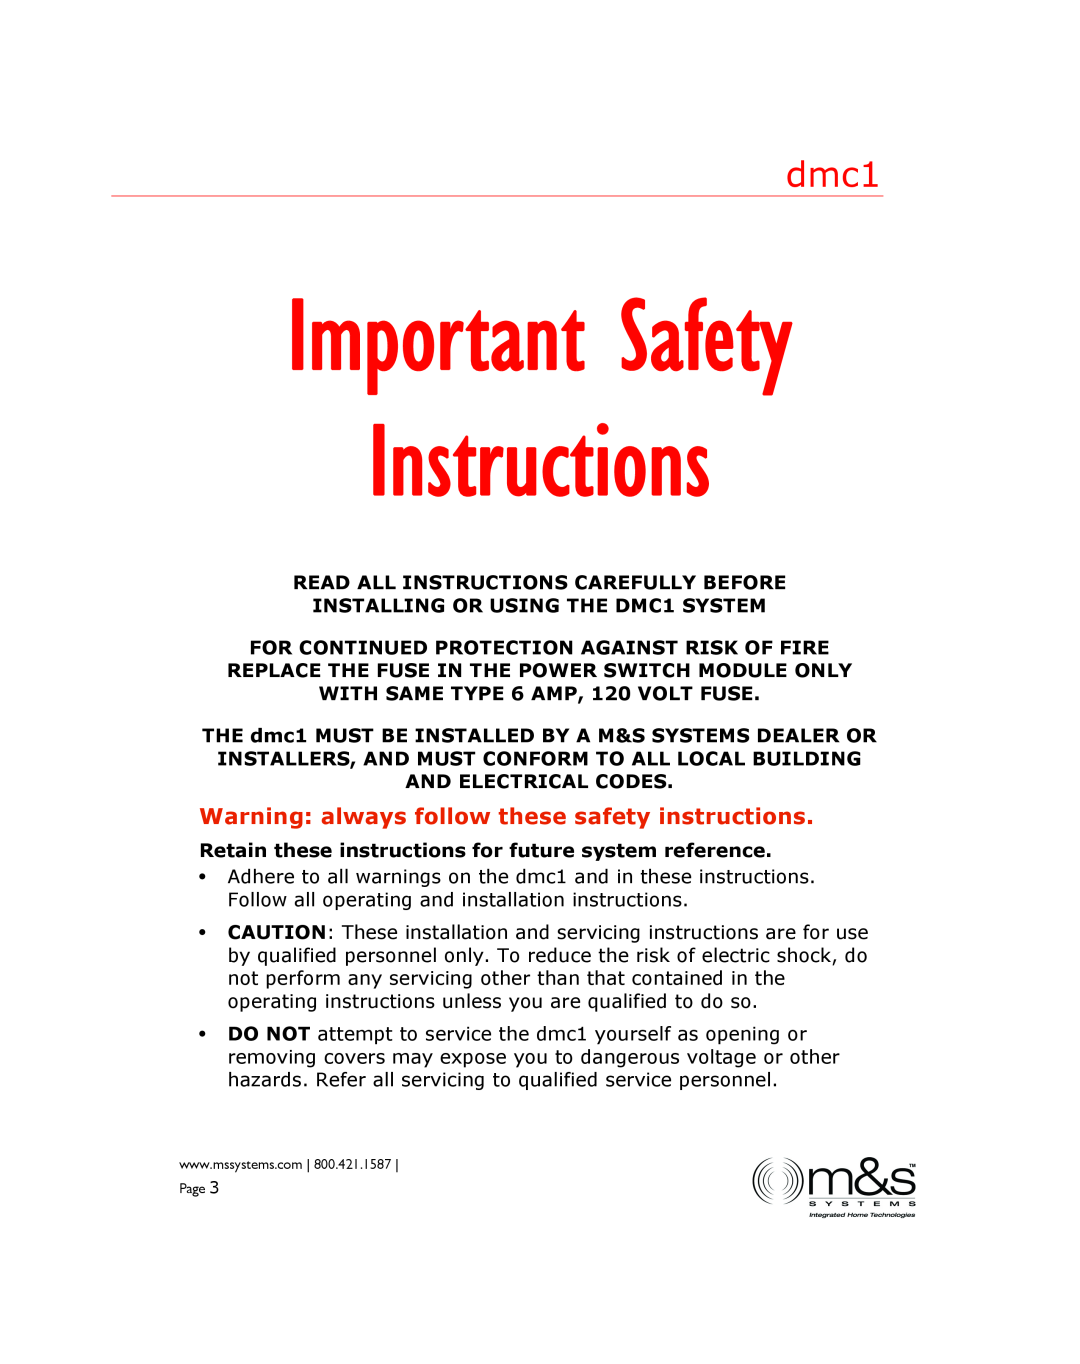 M&S Systems dmc1 manual Instructions, Important Safety, Warning always follow these safety instructions 